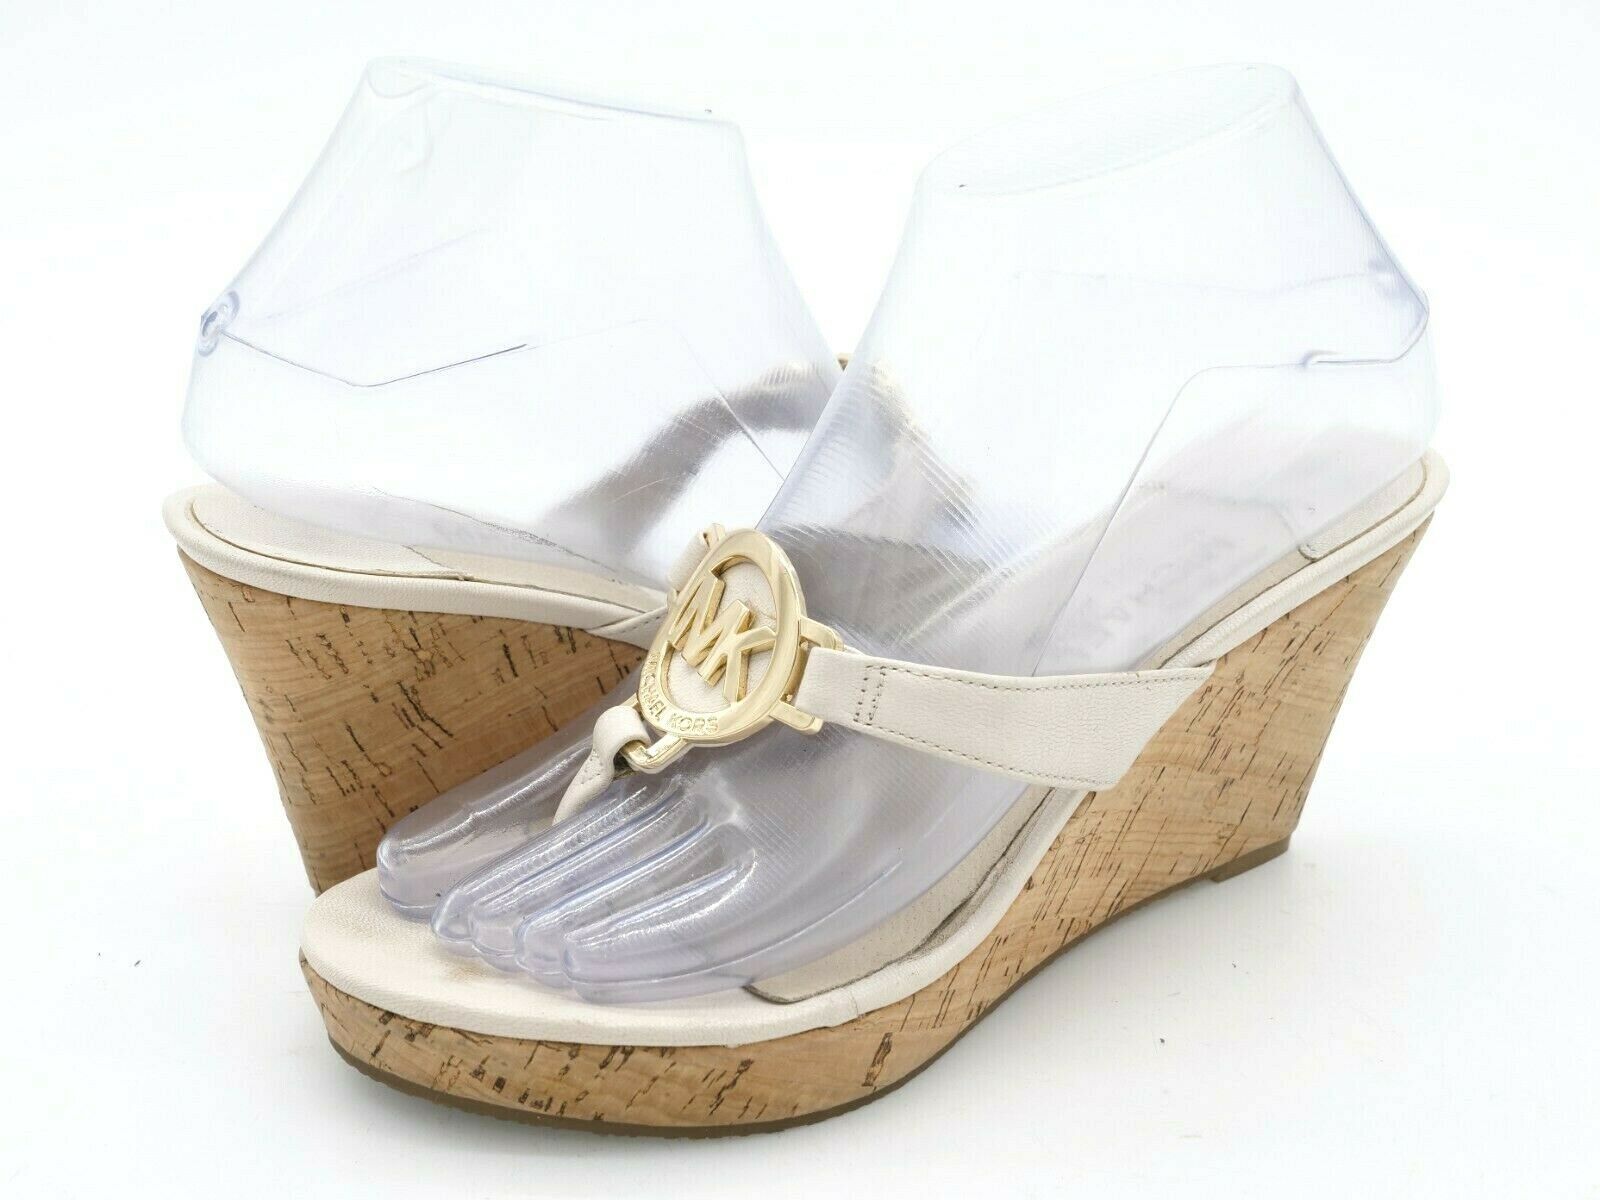 Michael Kors Womens 7 Sandals White Leather Large Medallion Cork Wedge Thong - $29.99